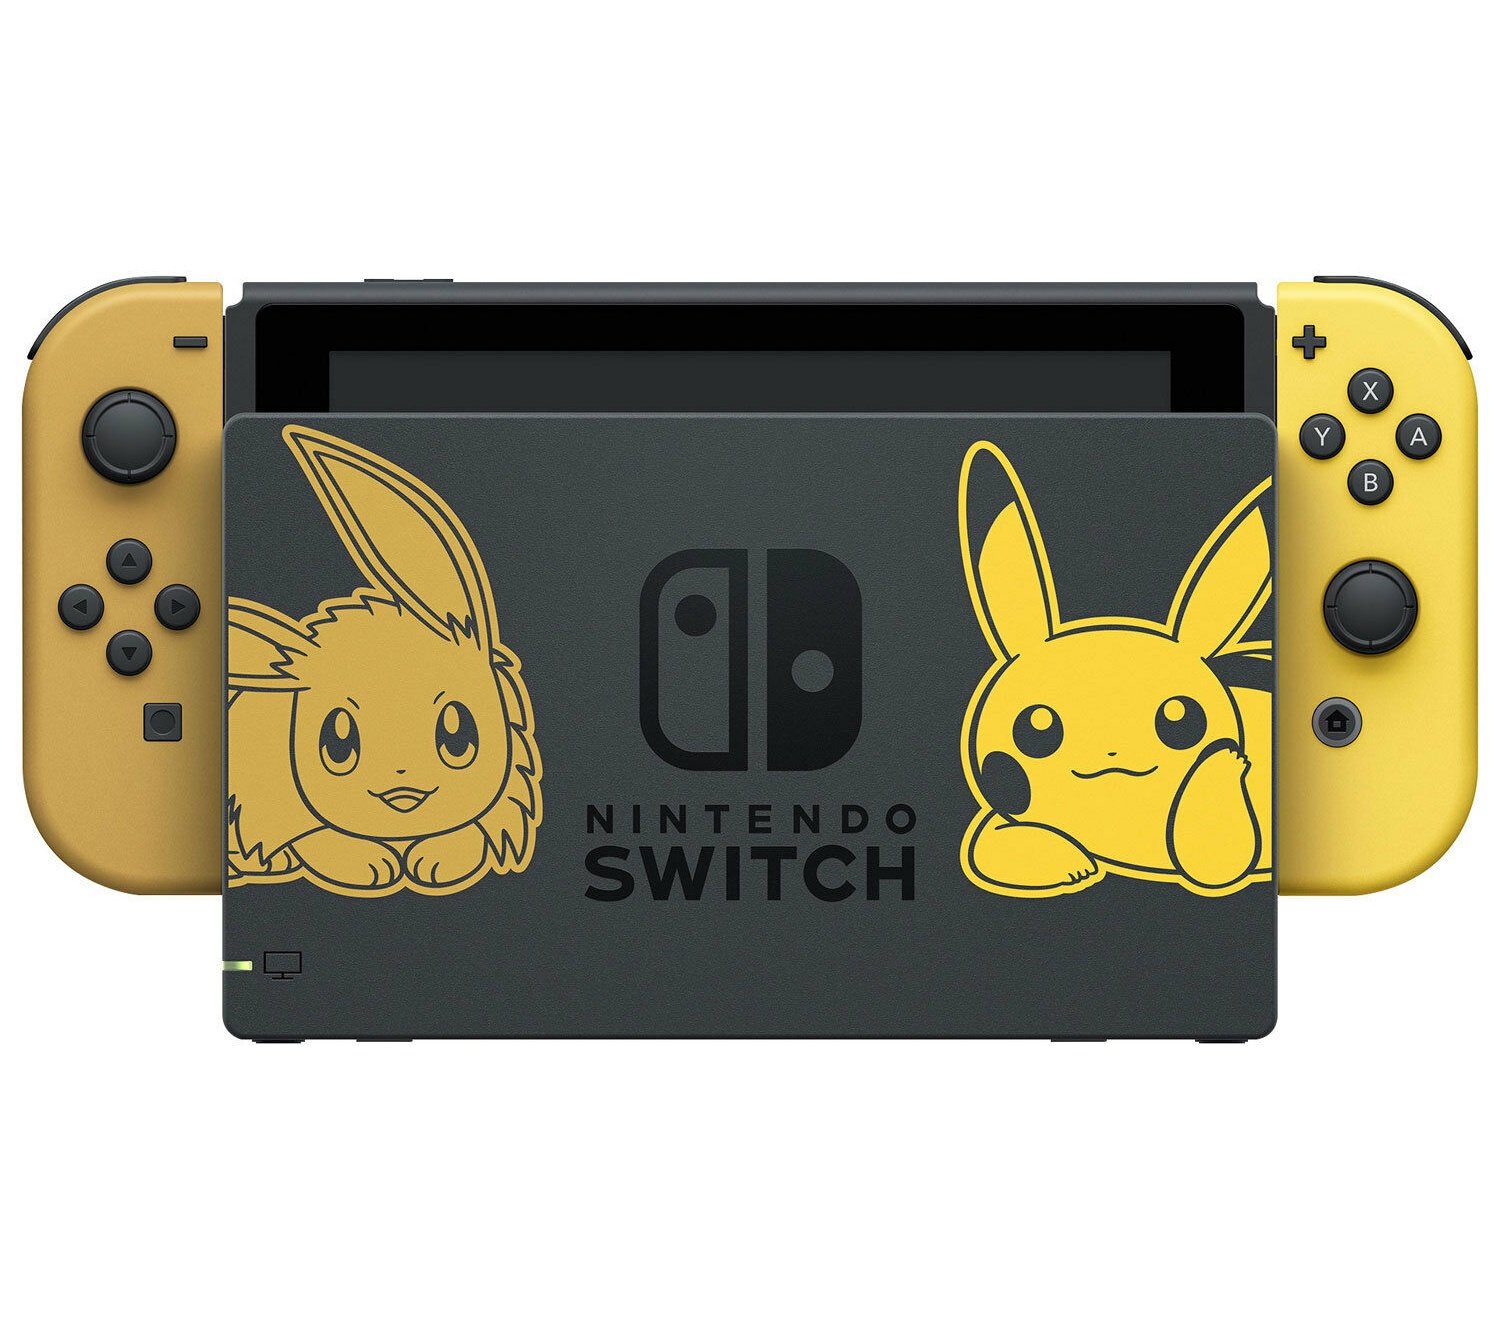 The official Pokémon: Let's Go and Pokémon Sword and Shield Switch consoles.